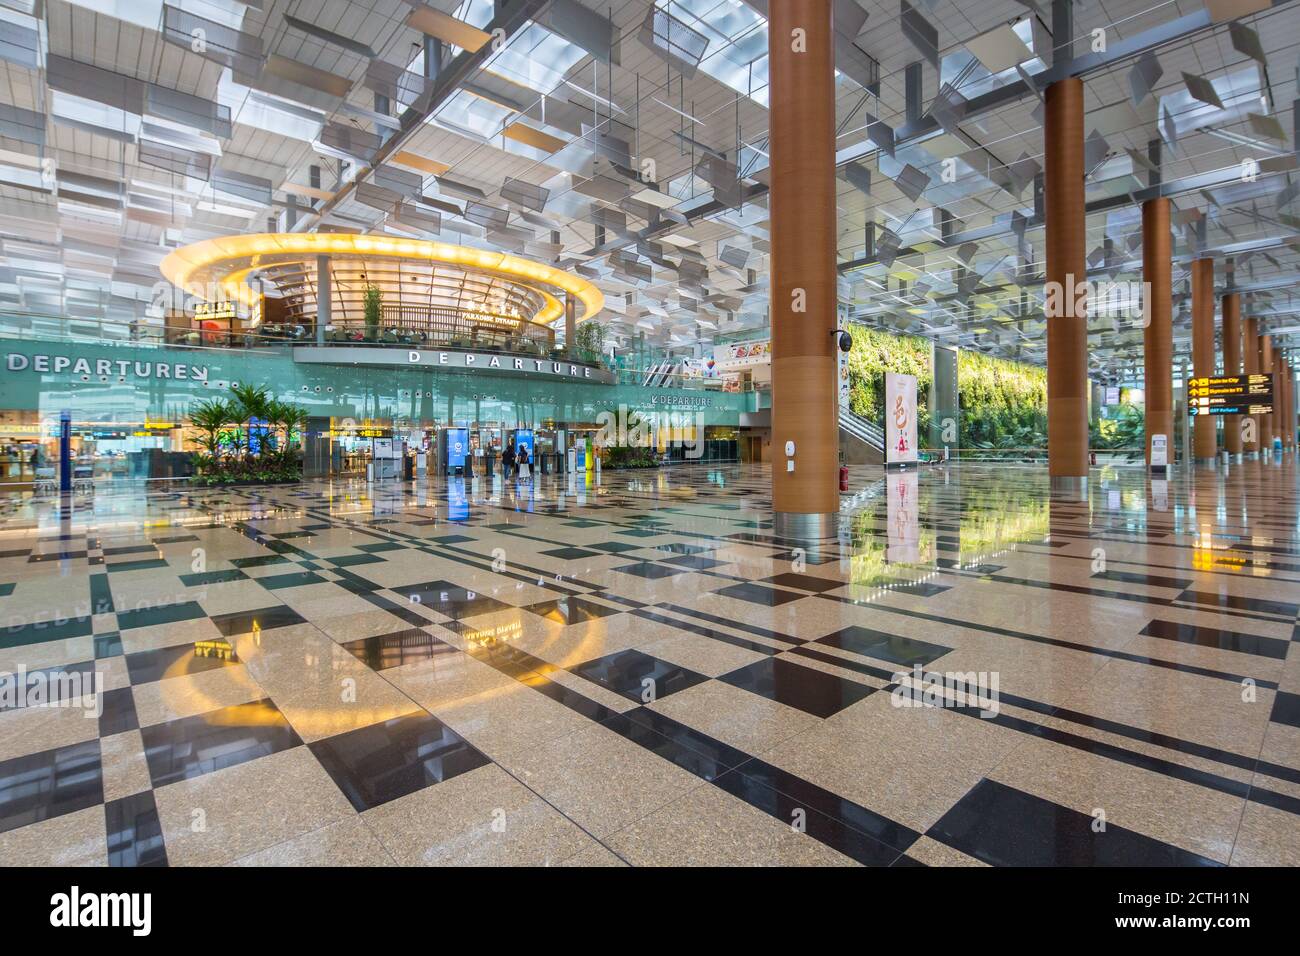 Changi Airport Departure area is lifeless due to the global pandemic outbreak that disrupted the aviation business and travellers around the world. Stock Photo